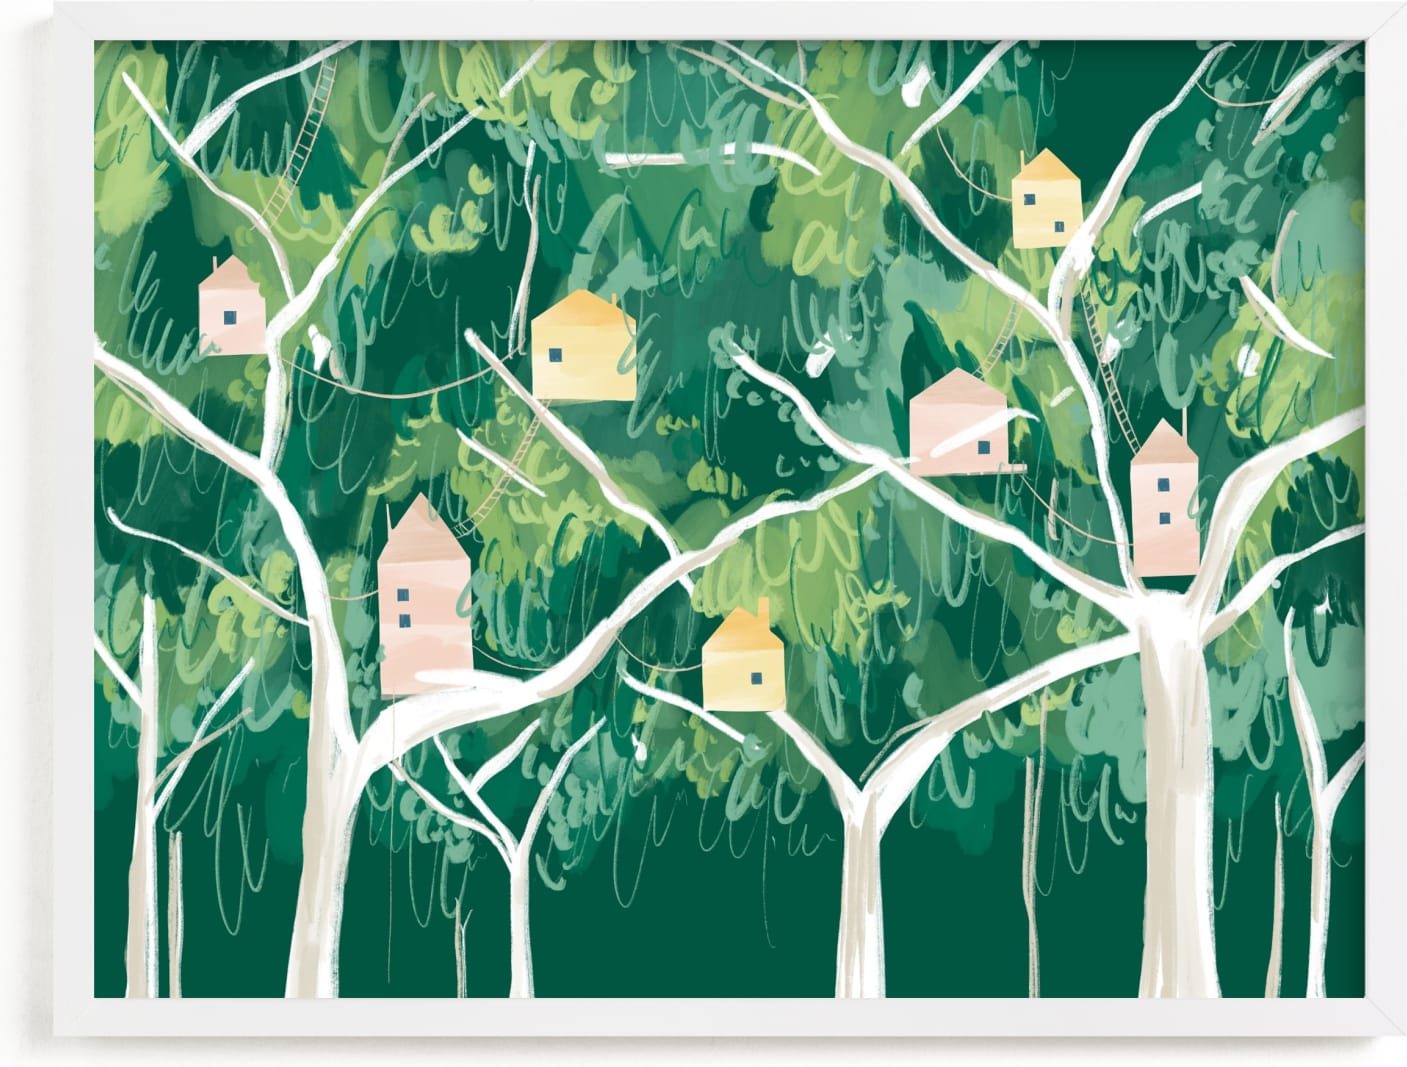 This is a colorful kids wall art by Krissy Bengtson called Forest Village.